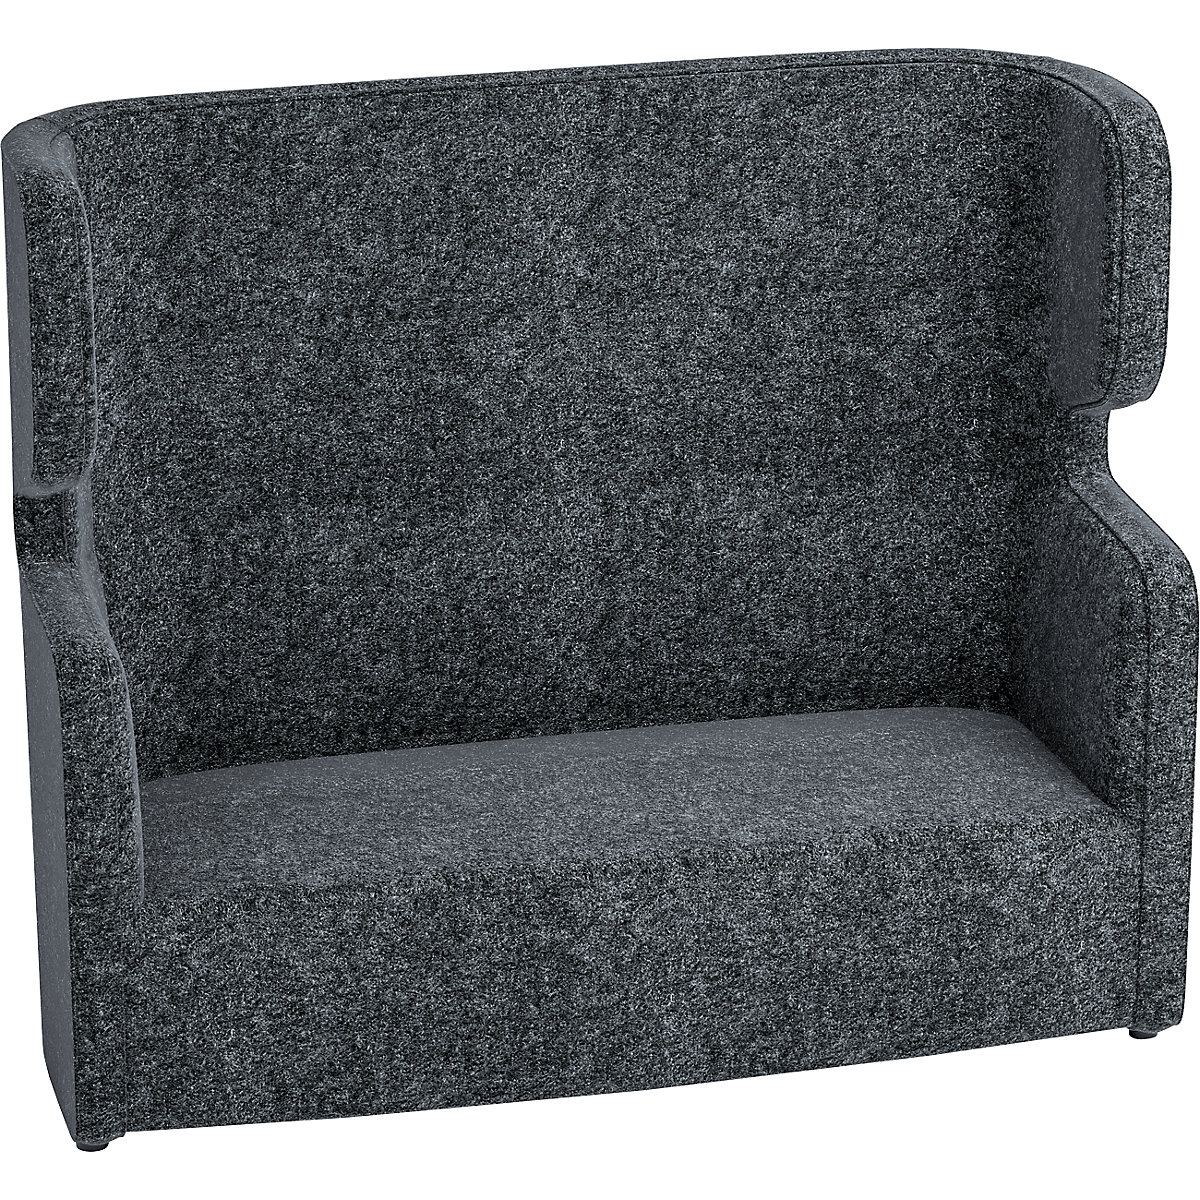 VIVO acoustic sofa – BISLEY, two-seater with high back rest, charcoal